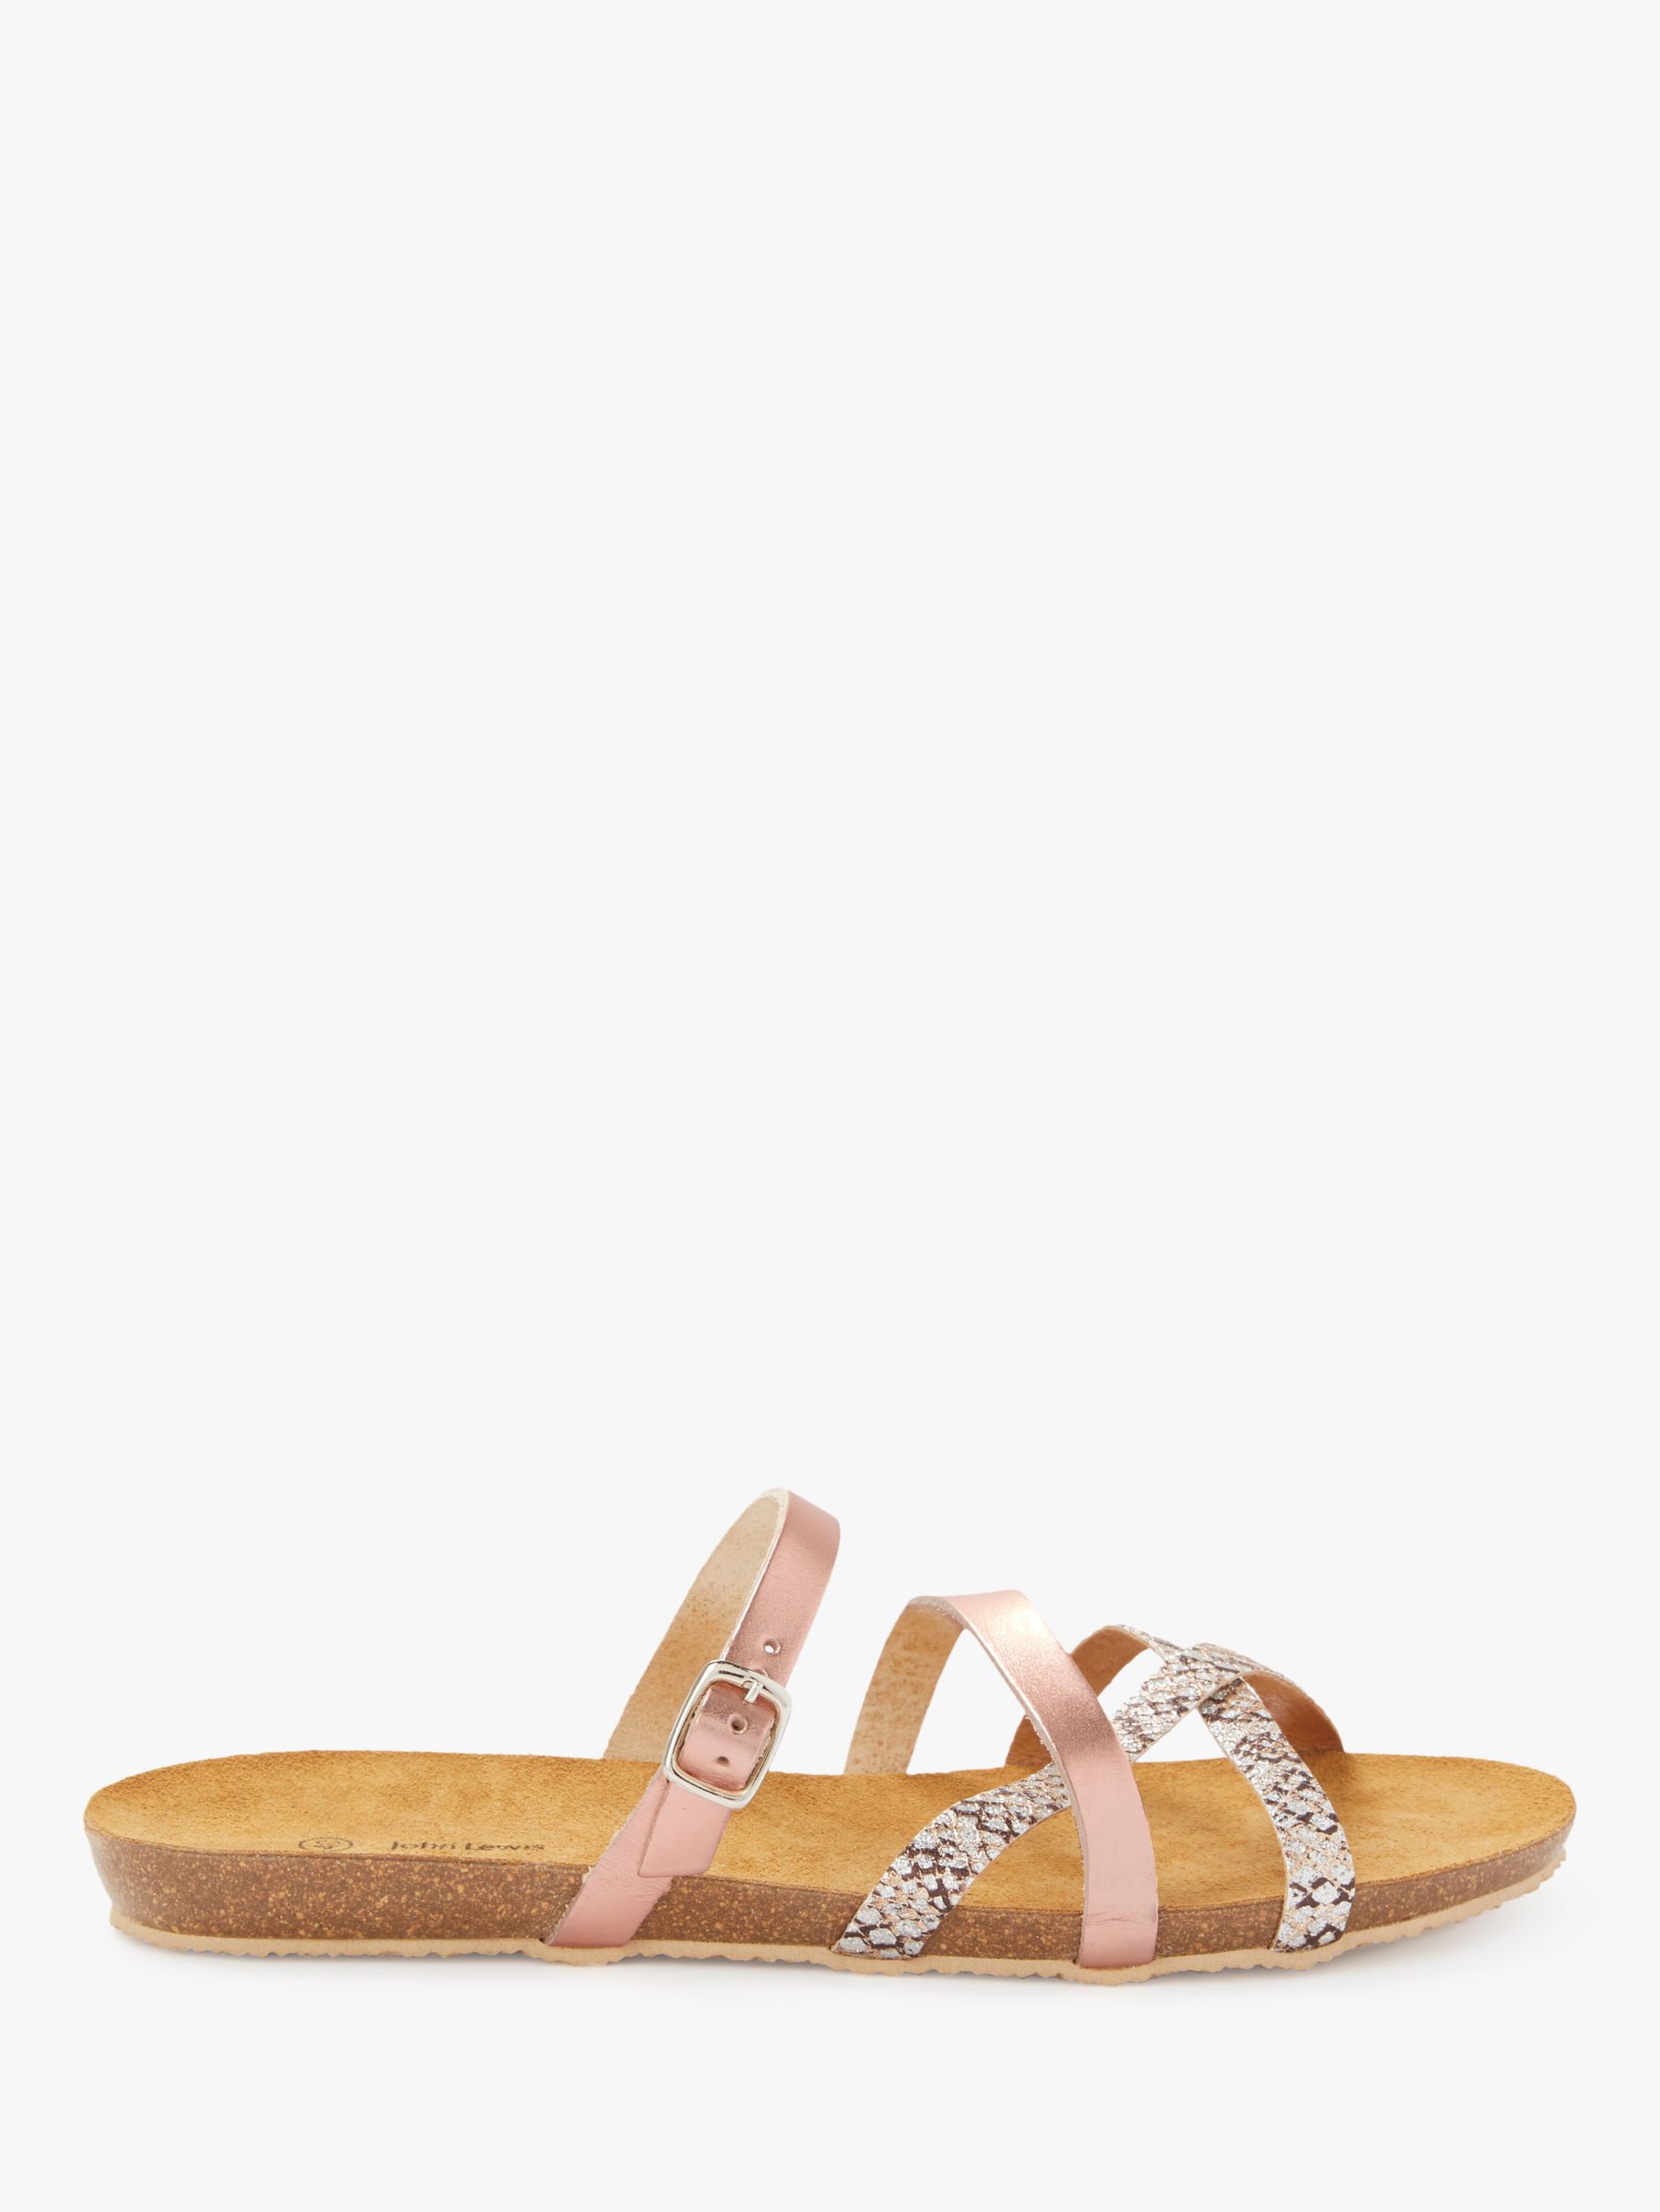 John Lewis & Partners Lois Strappy Sandals, Rose Gold Leather